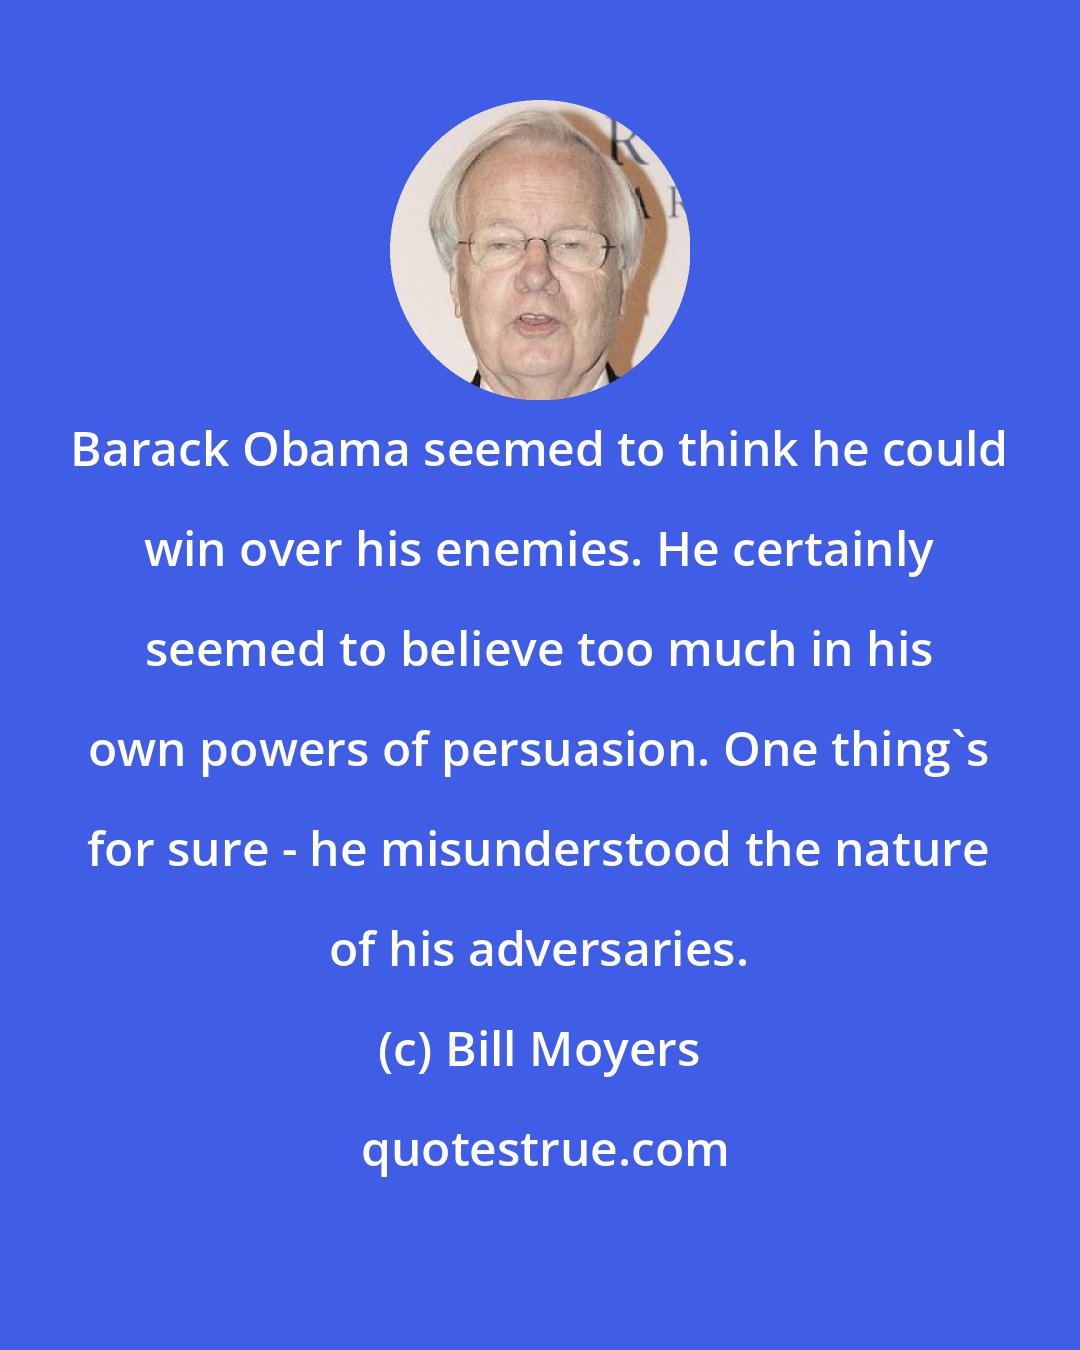 Bill Moyers: Barack Obama seemed to think he could win over his enemies. He certainly seemed to believe too much in his own powers of persuasion. One thing's for sure - he misunderstood the nature of his adversaries.